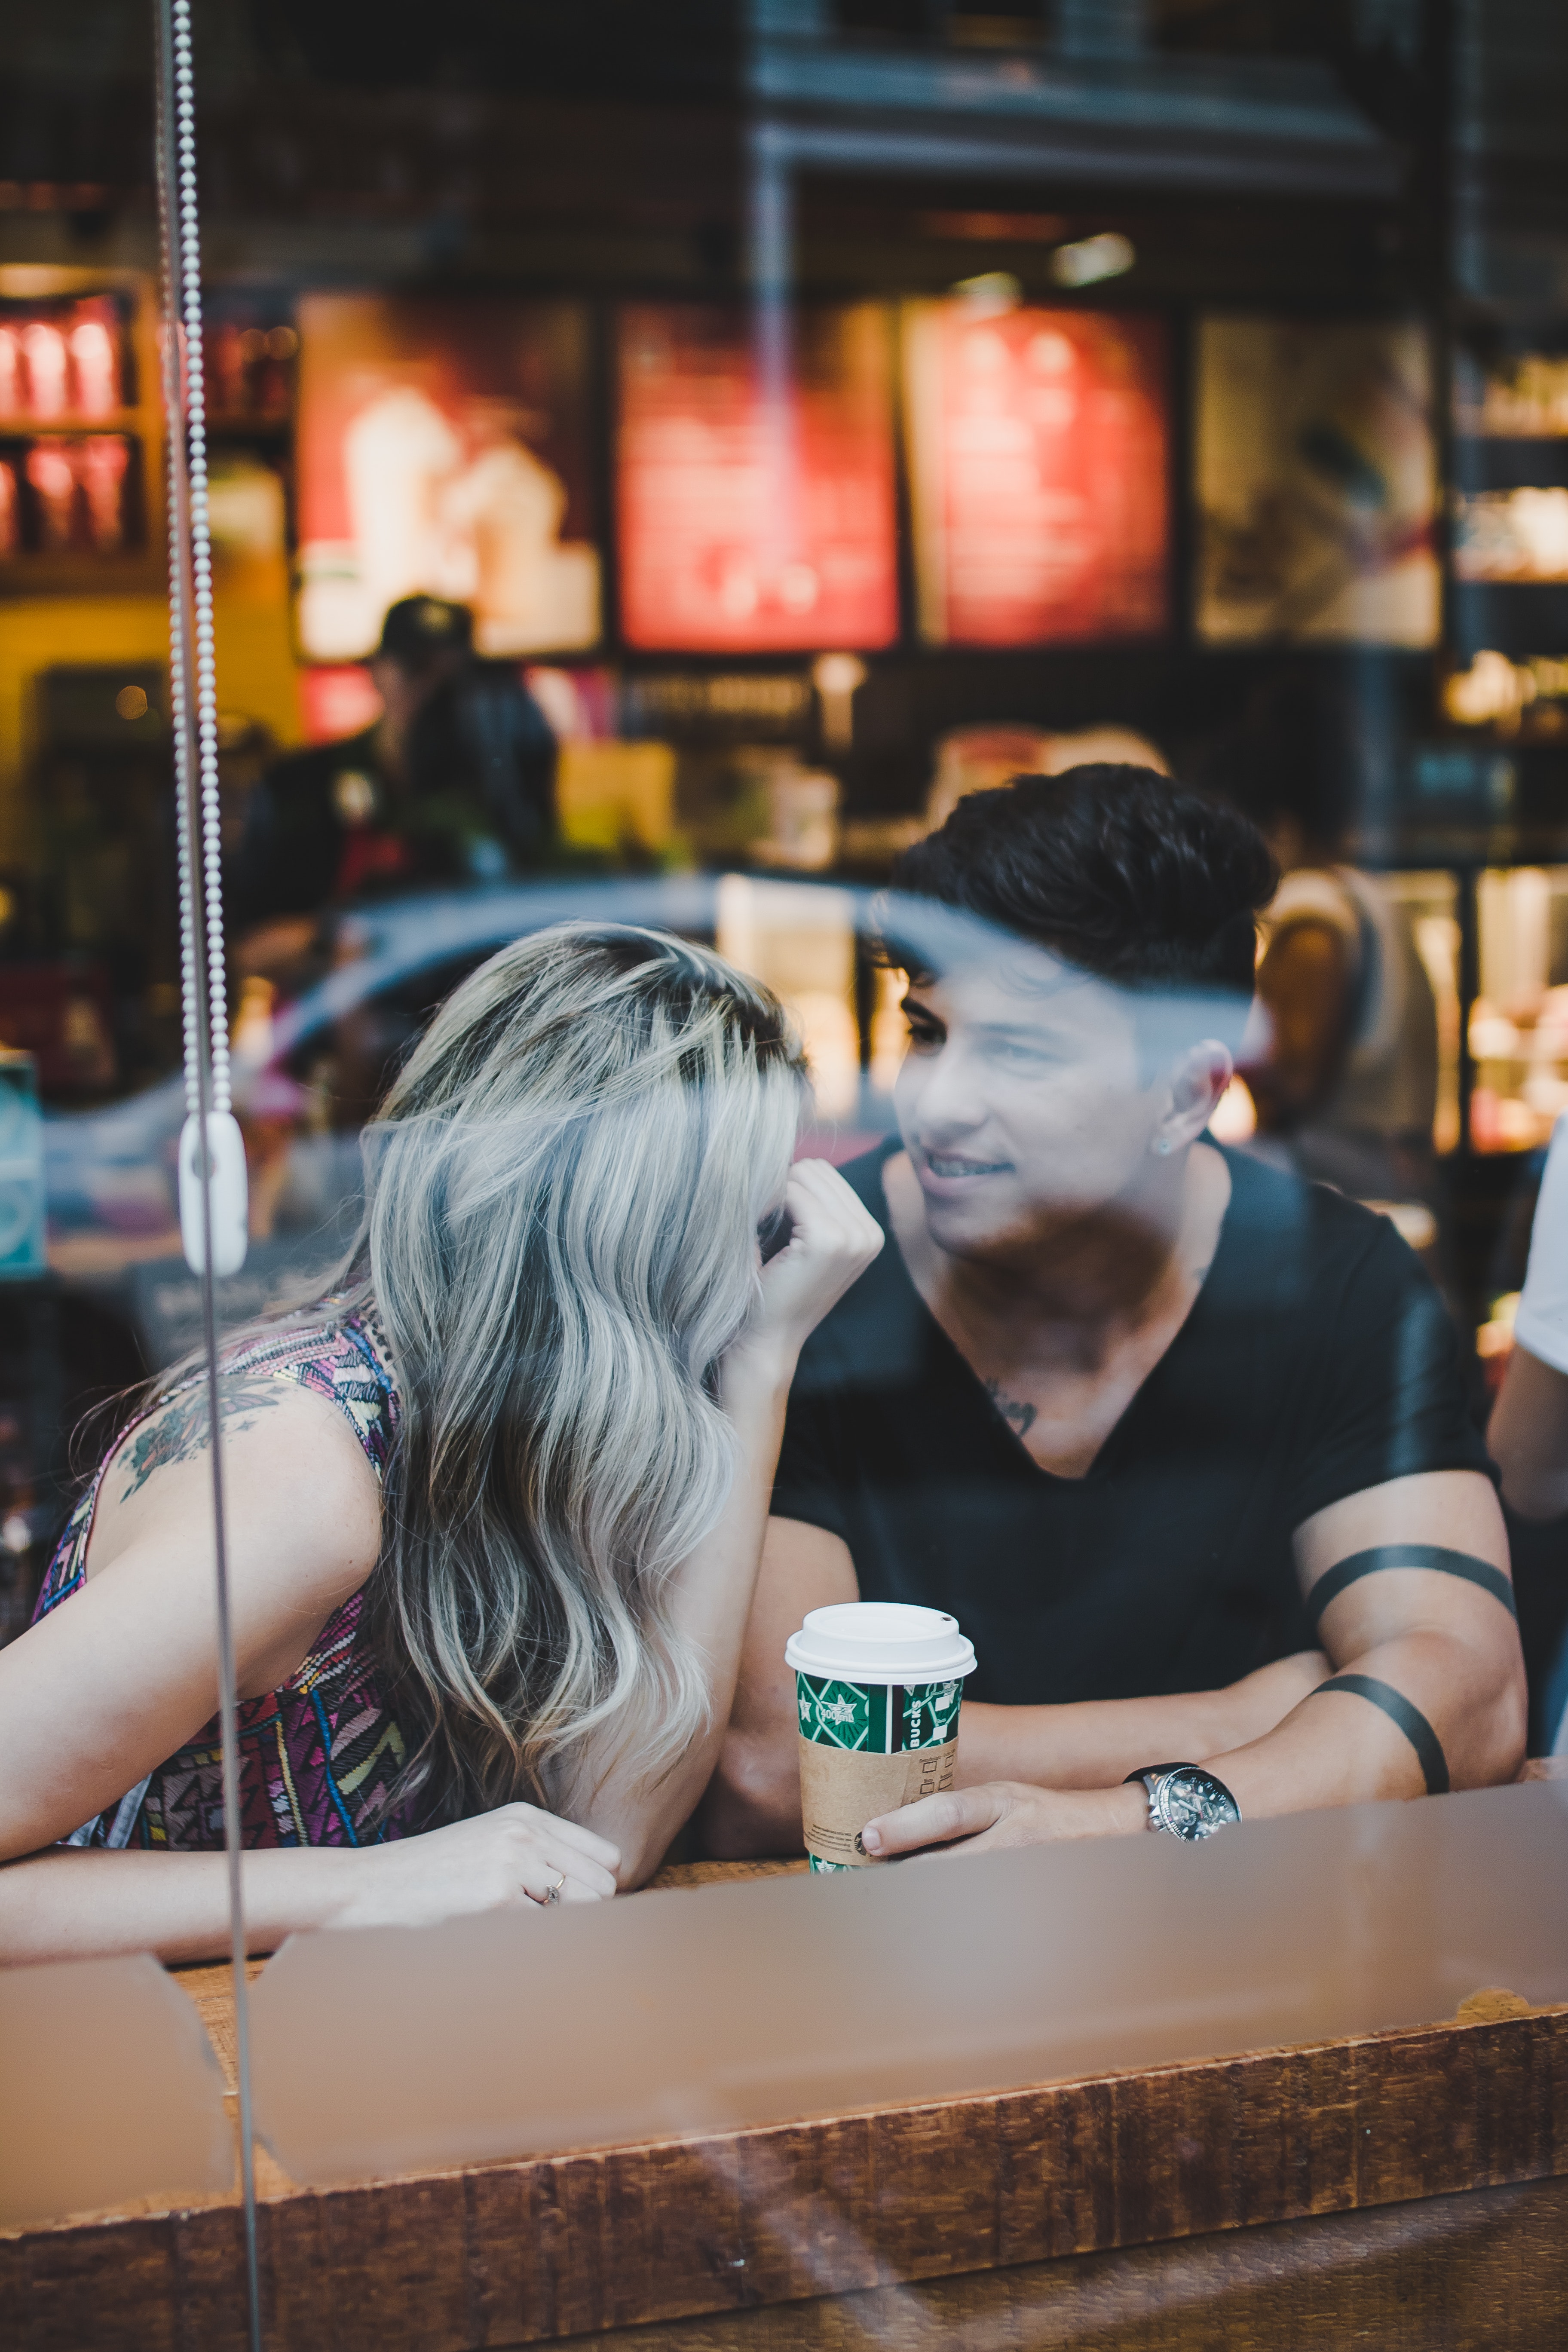 A couple talking at a coffee shop. | Source: Pexels